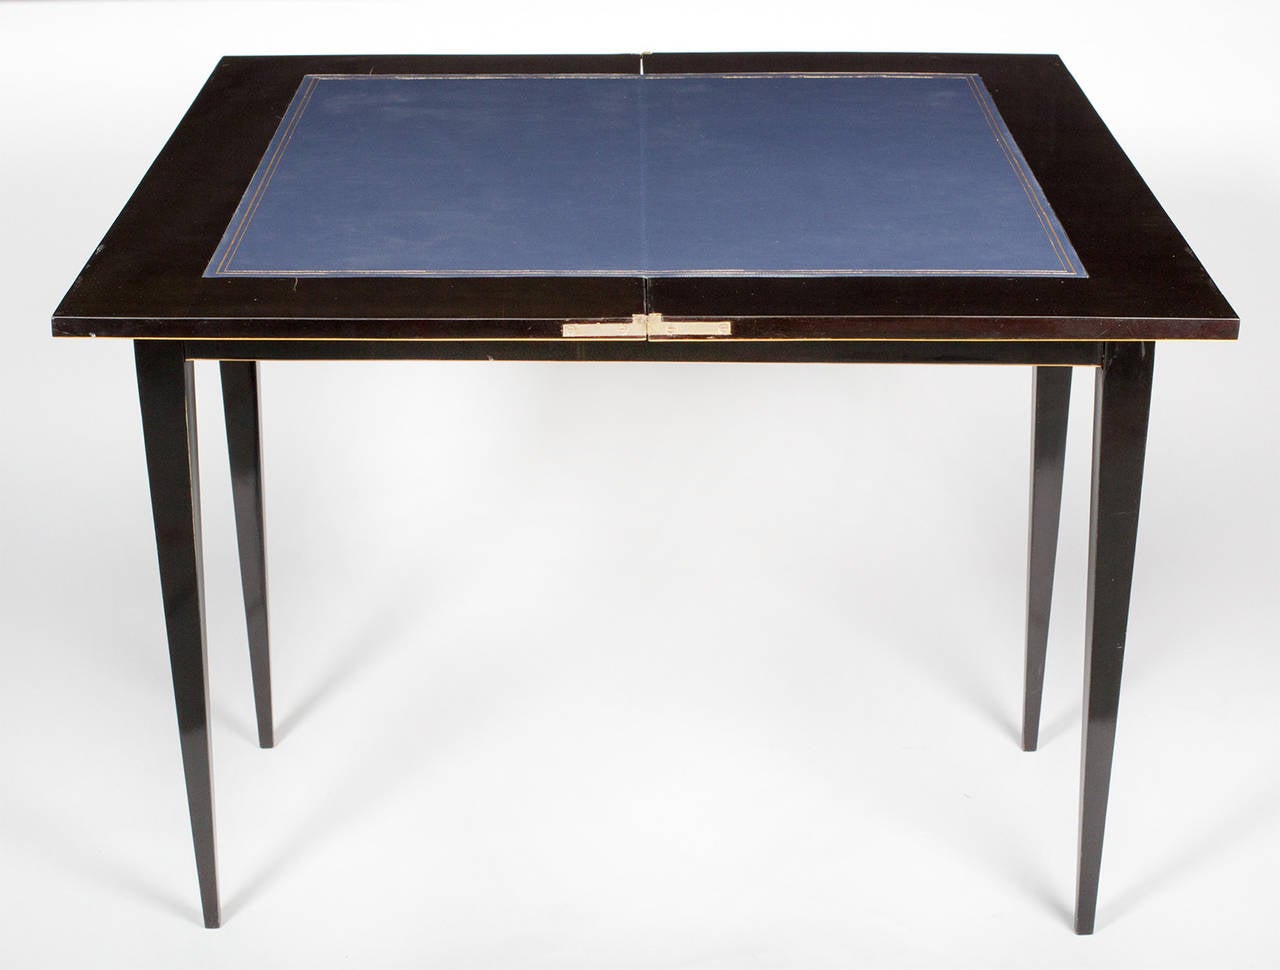 A Biedermeier console or game table in ebonized pear veneer with maple inlays and tapered legs.